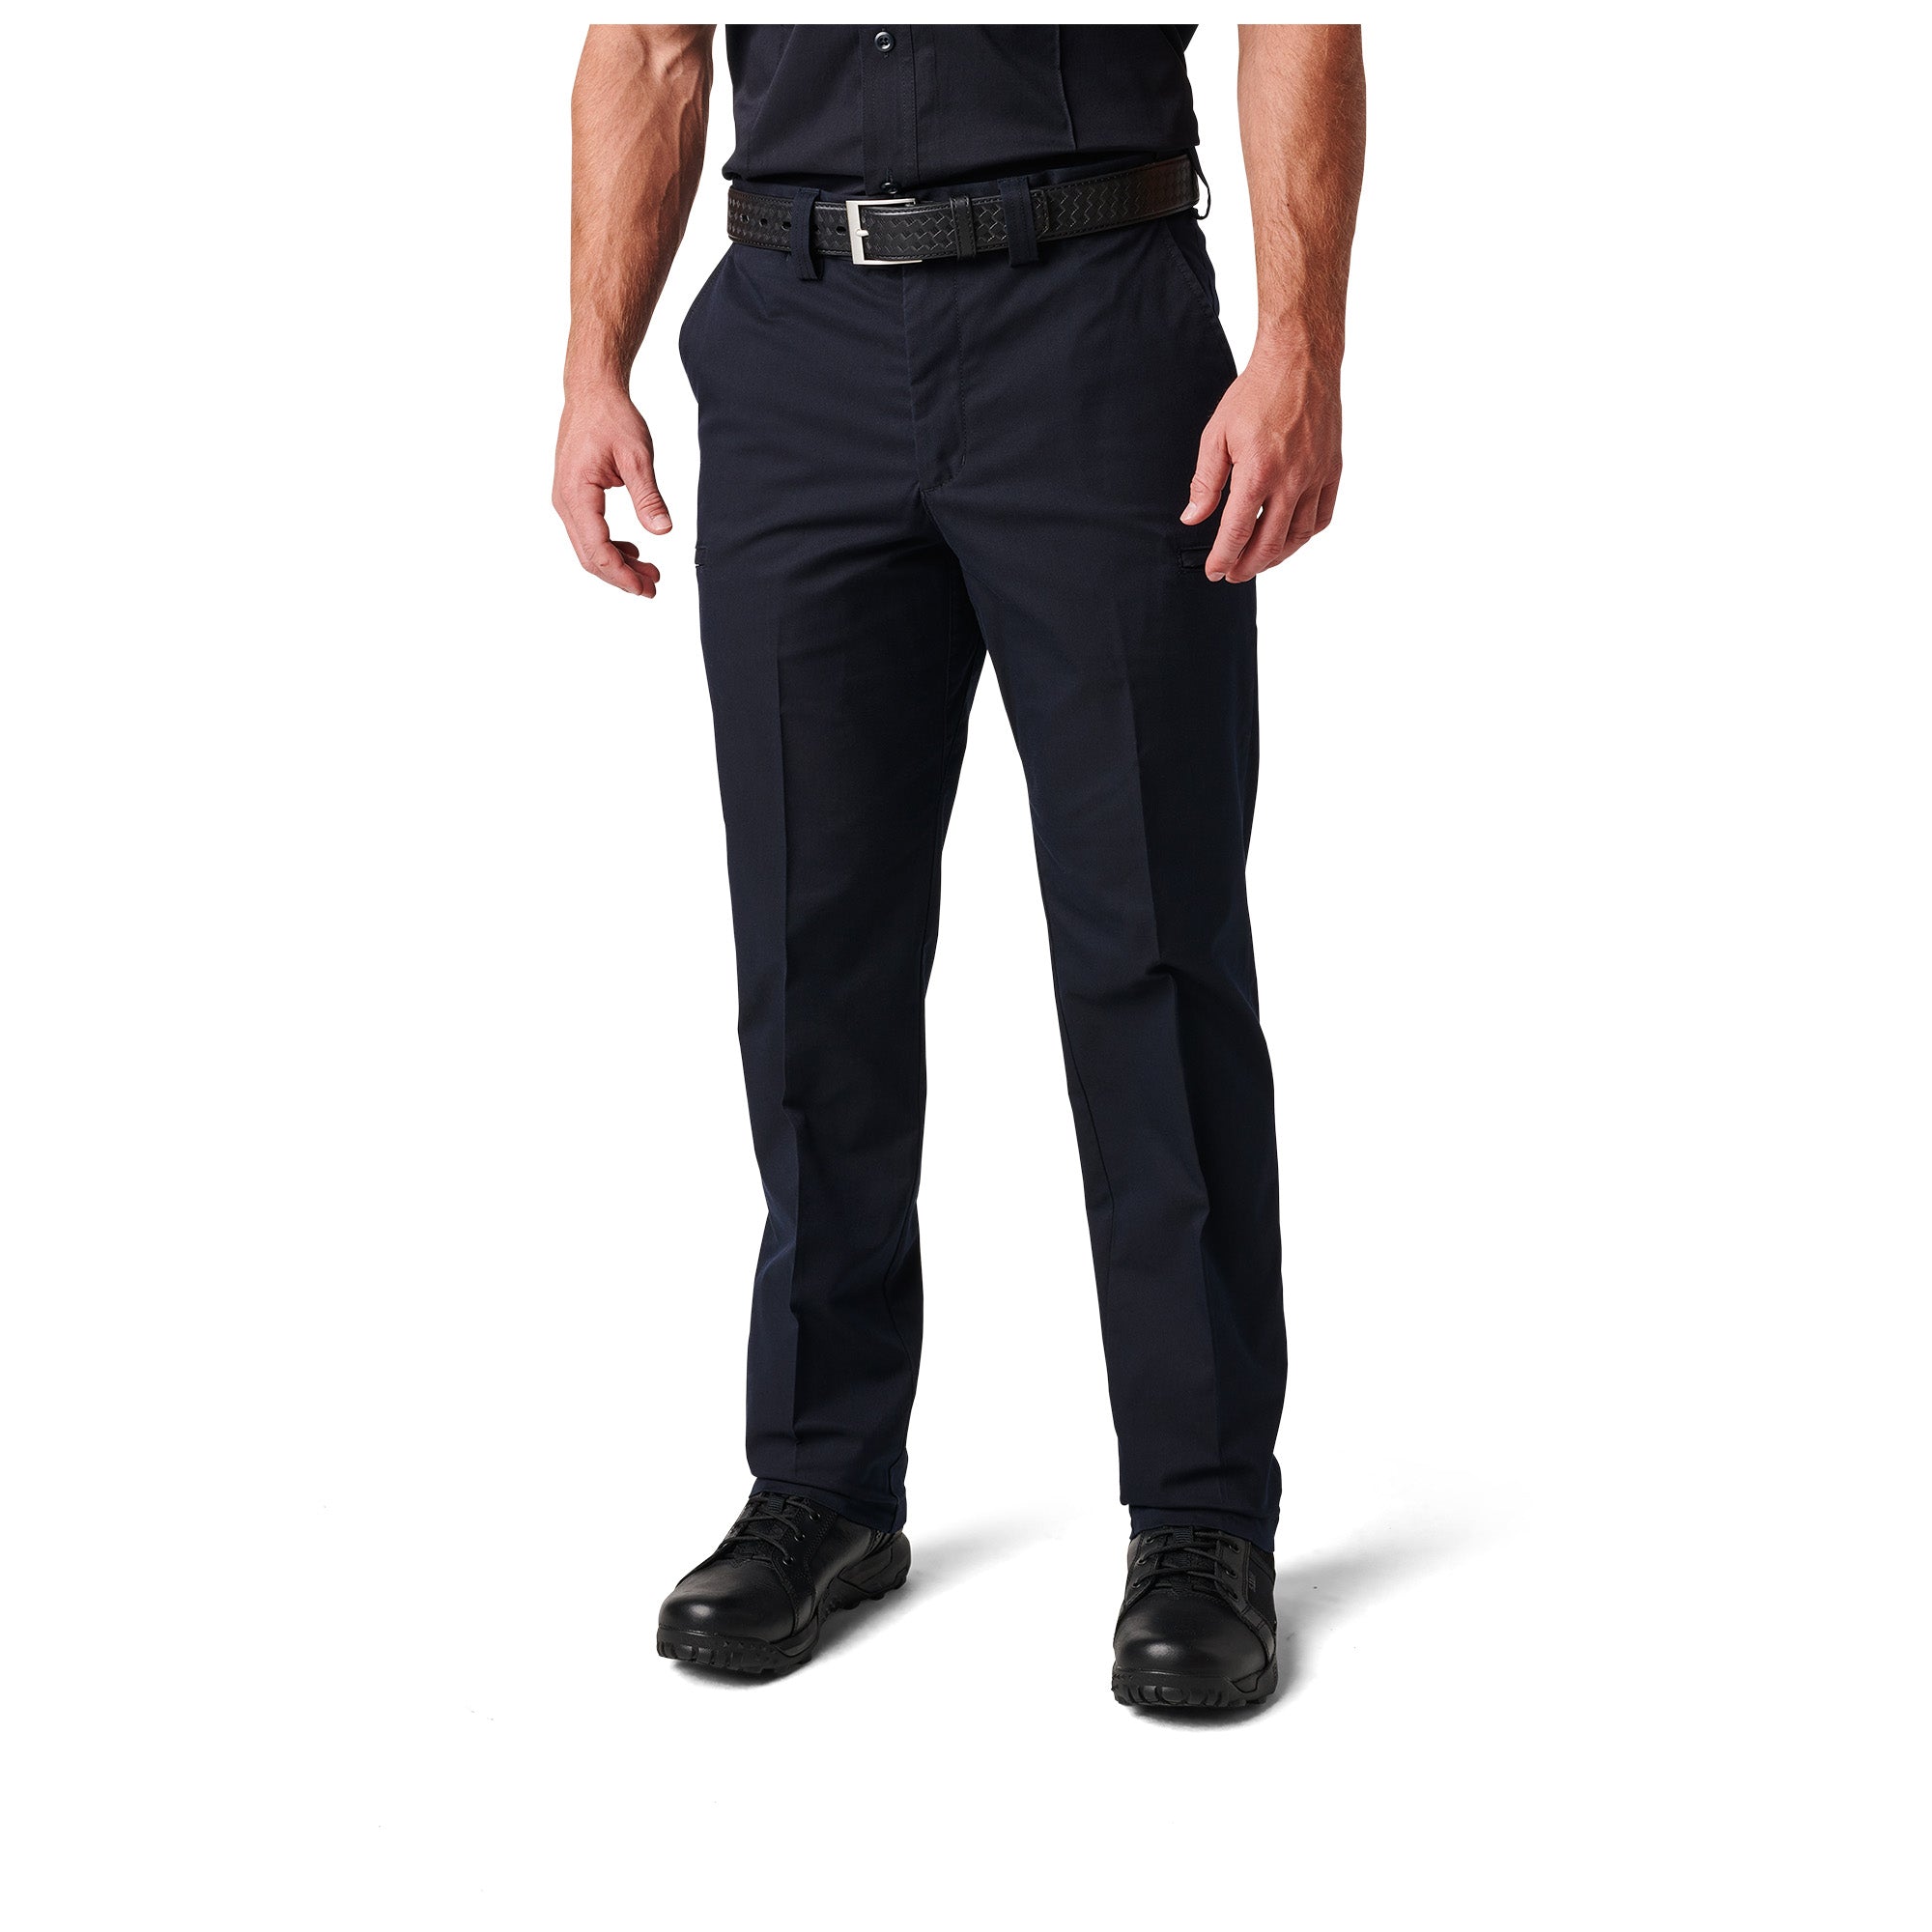 5.11 TACTICAL STRYKE PANT (100% AUTHENTIC) | Shopee Malaysia